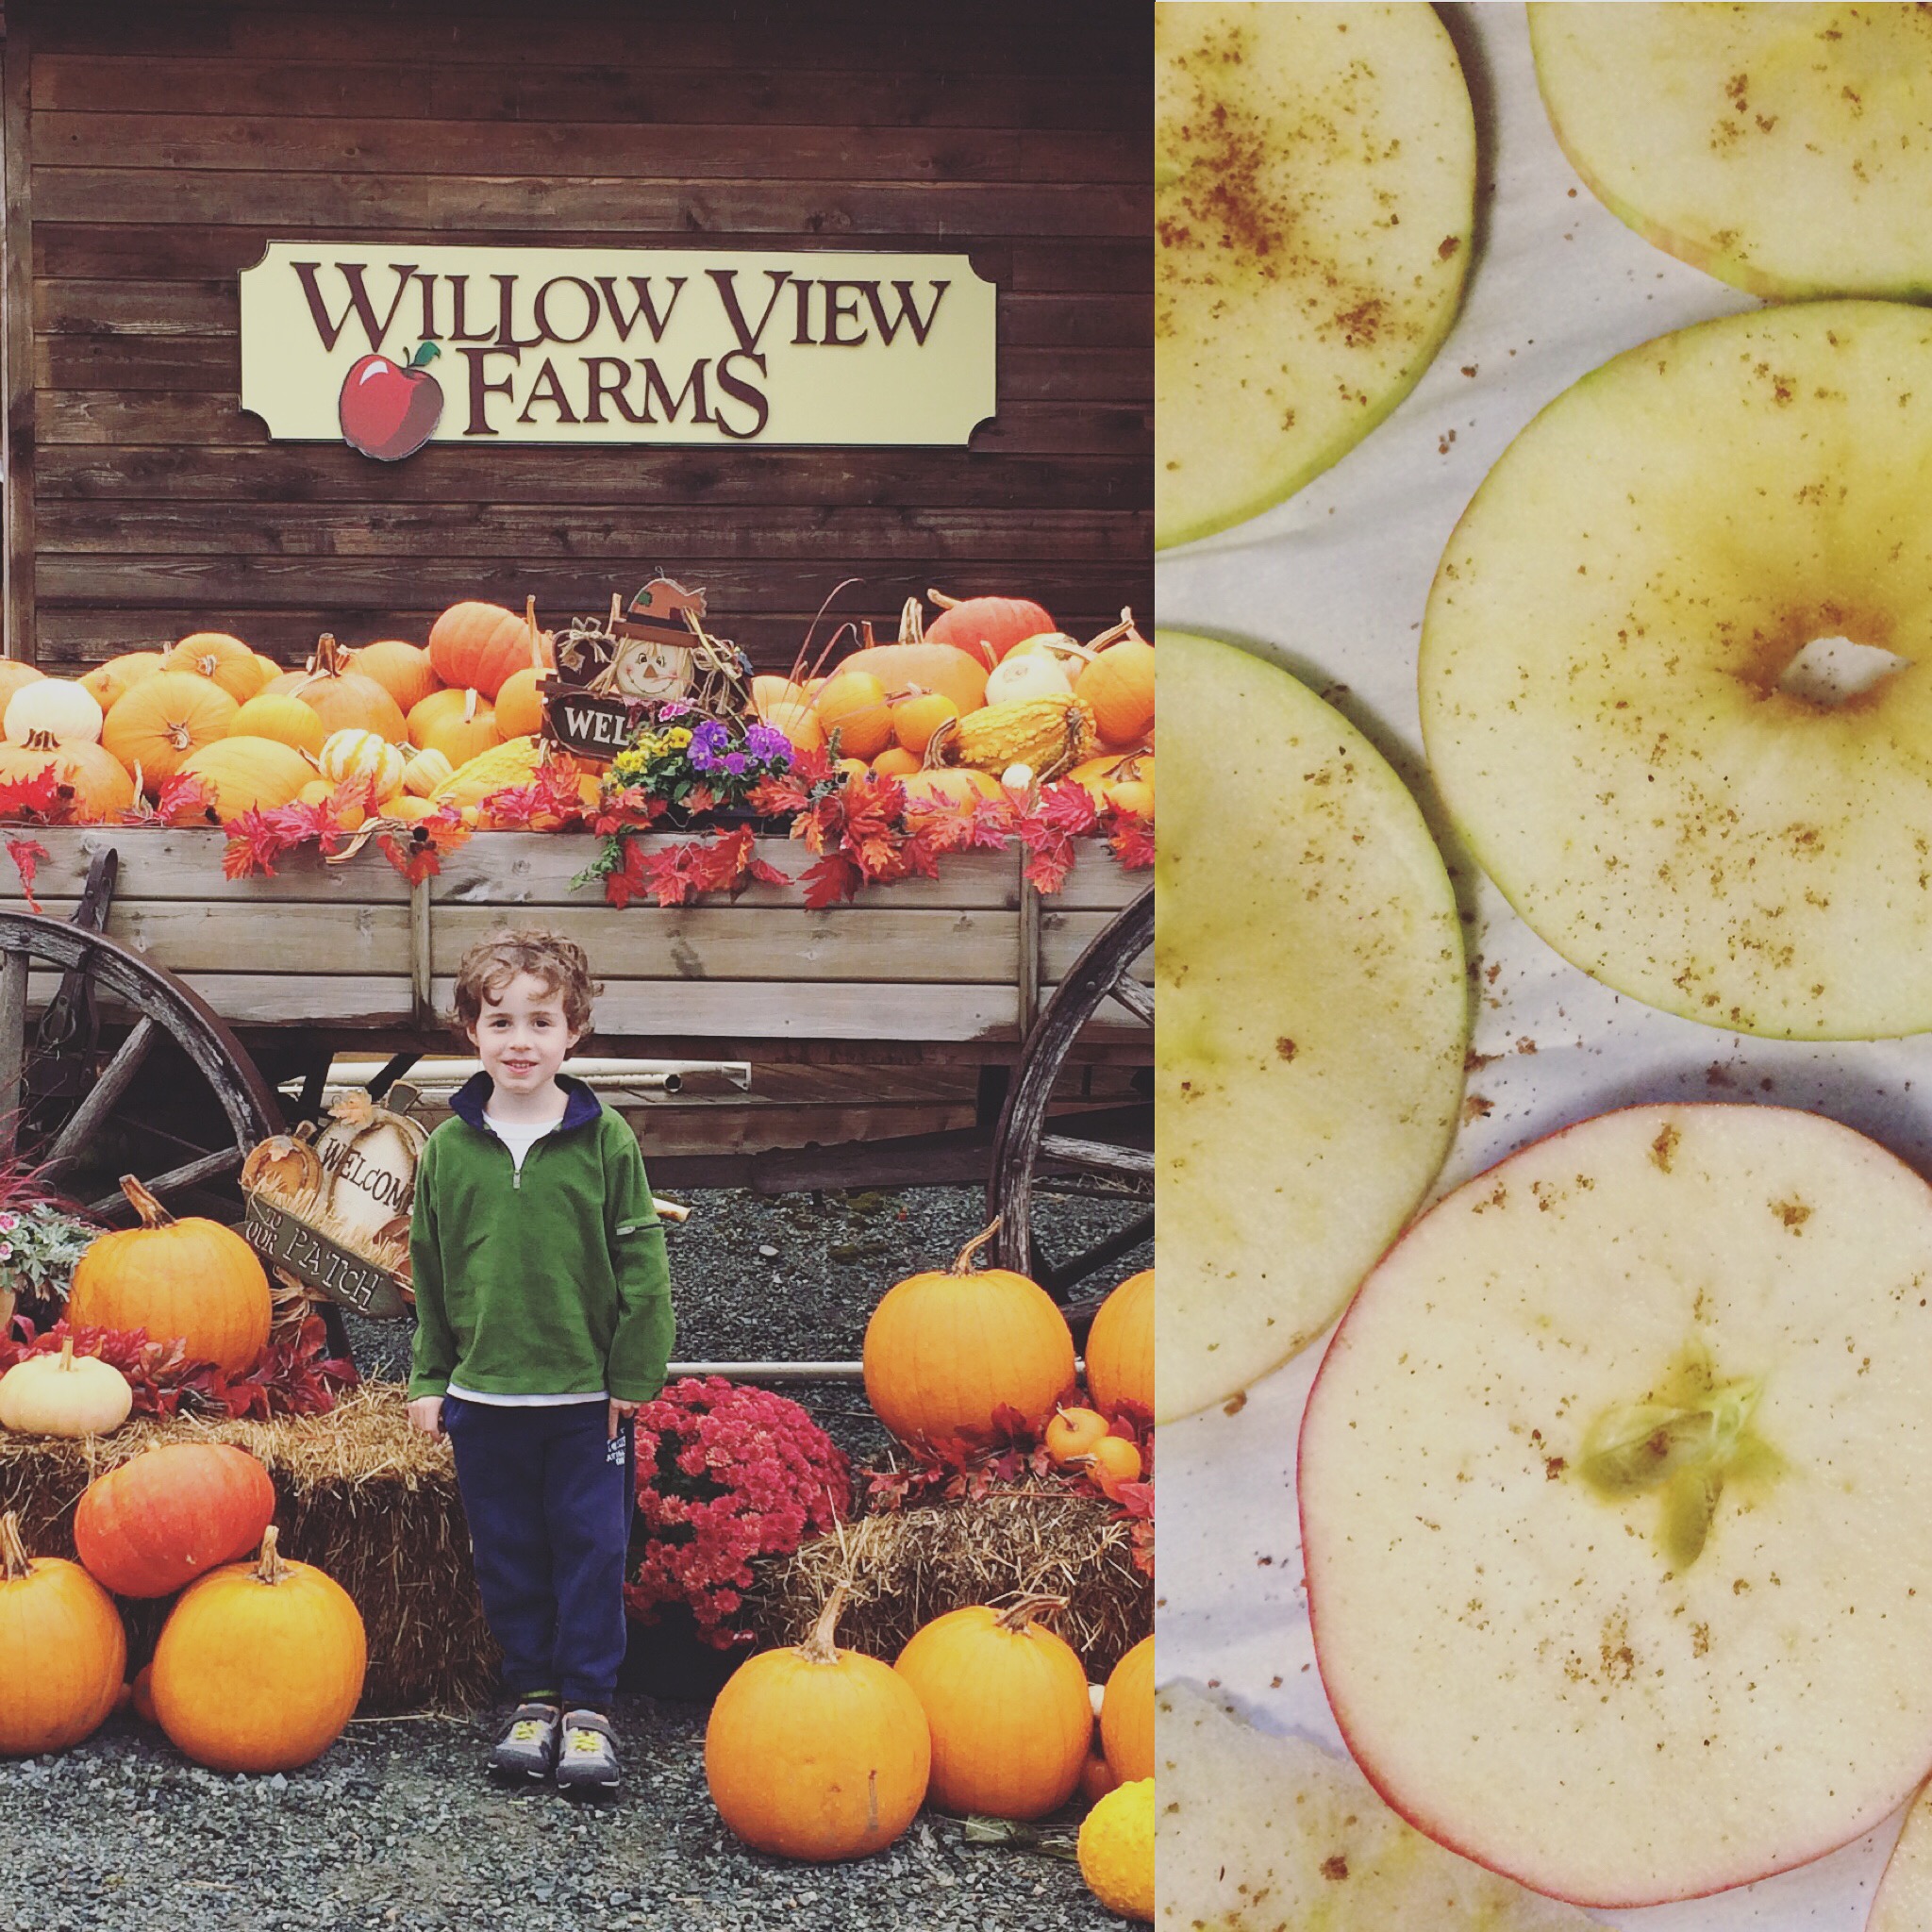 We made apple chips after apple-picking at Willow View Farms